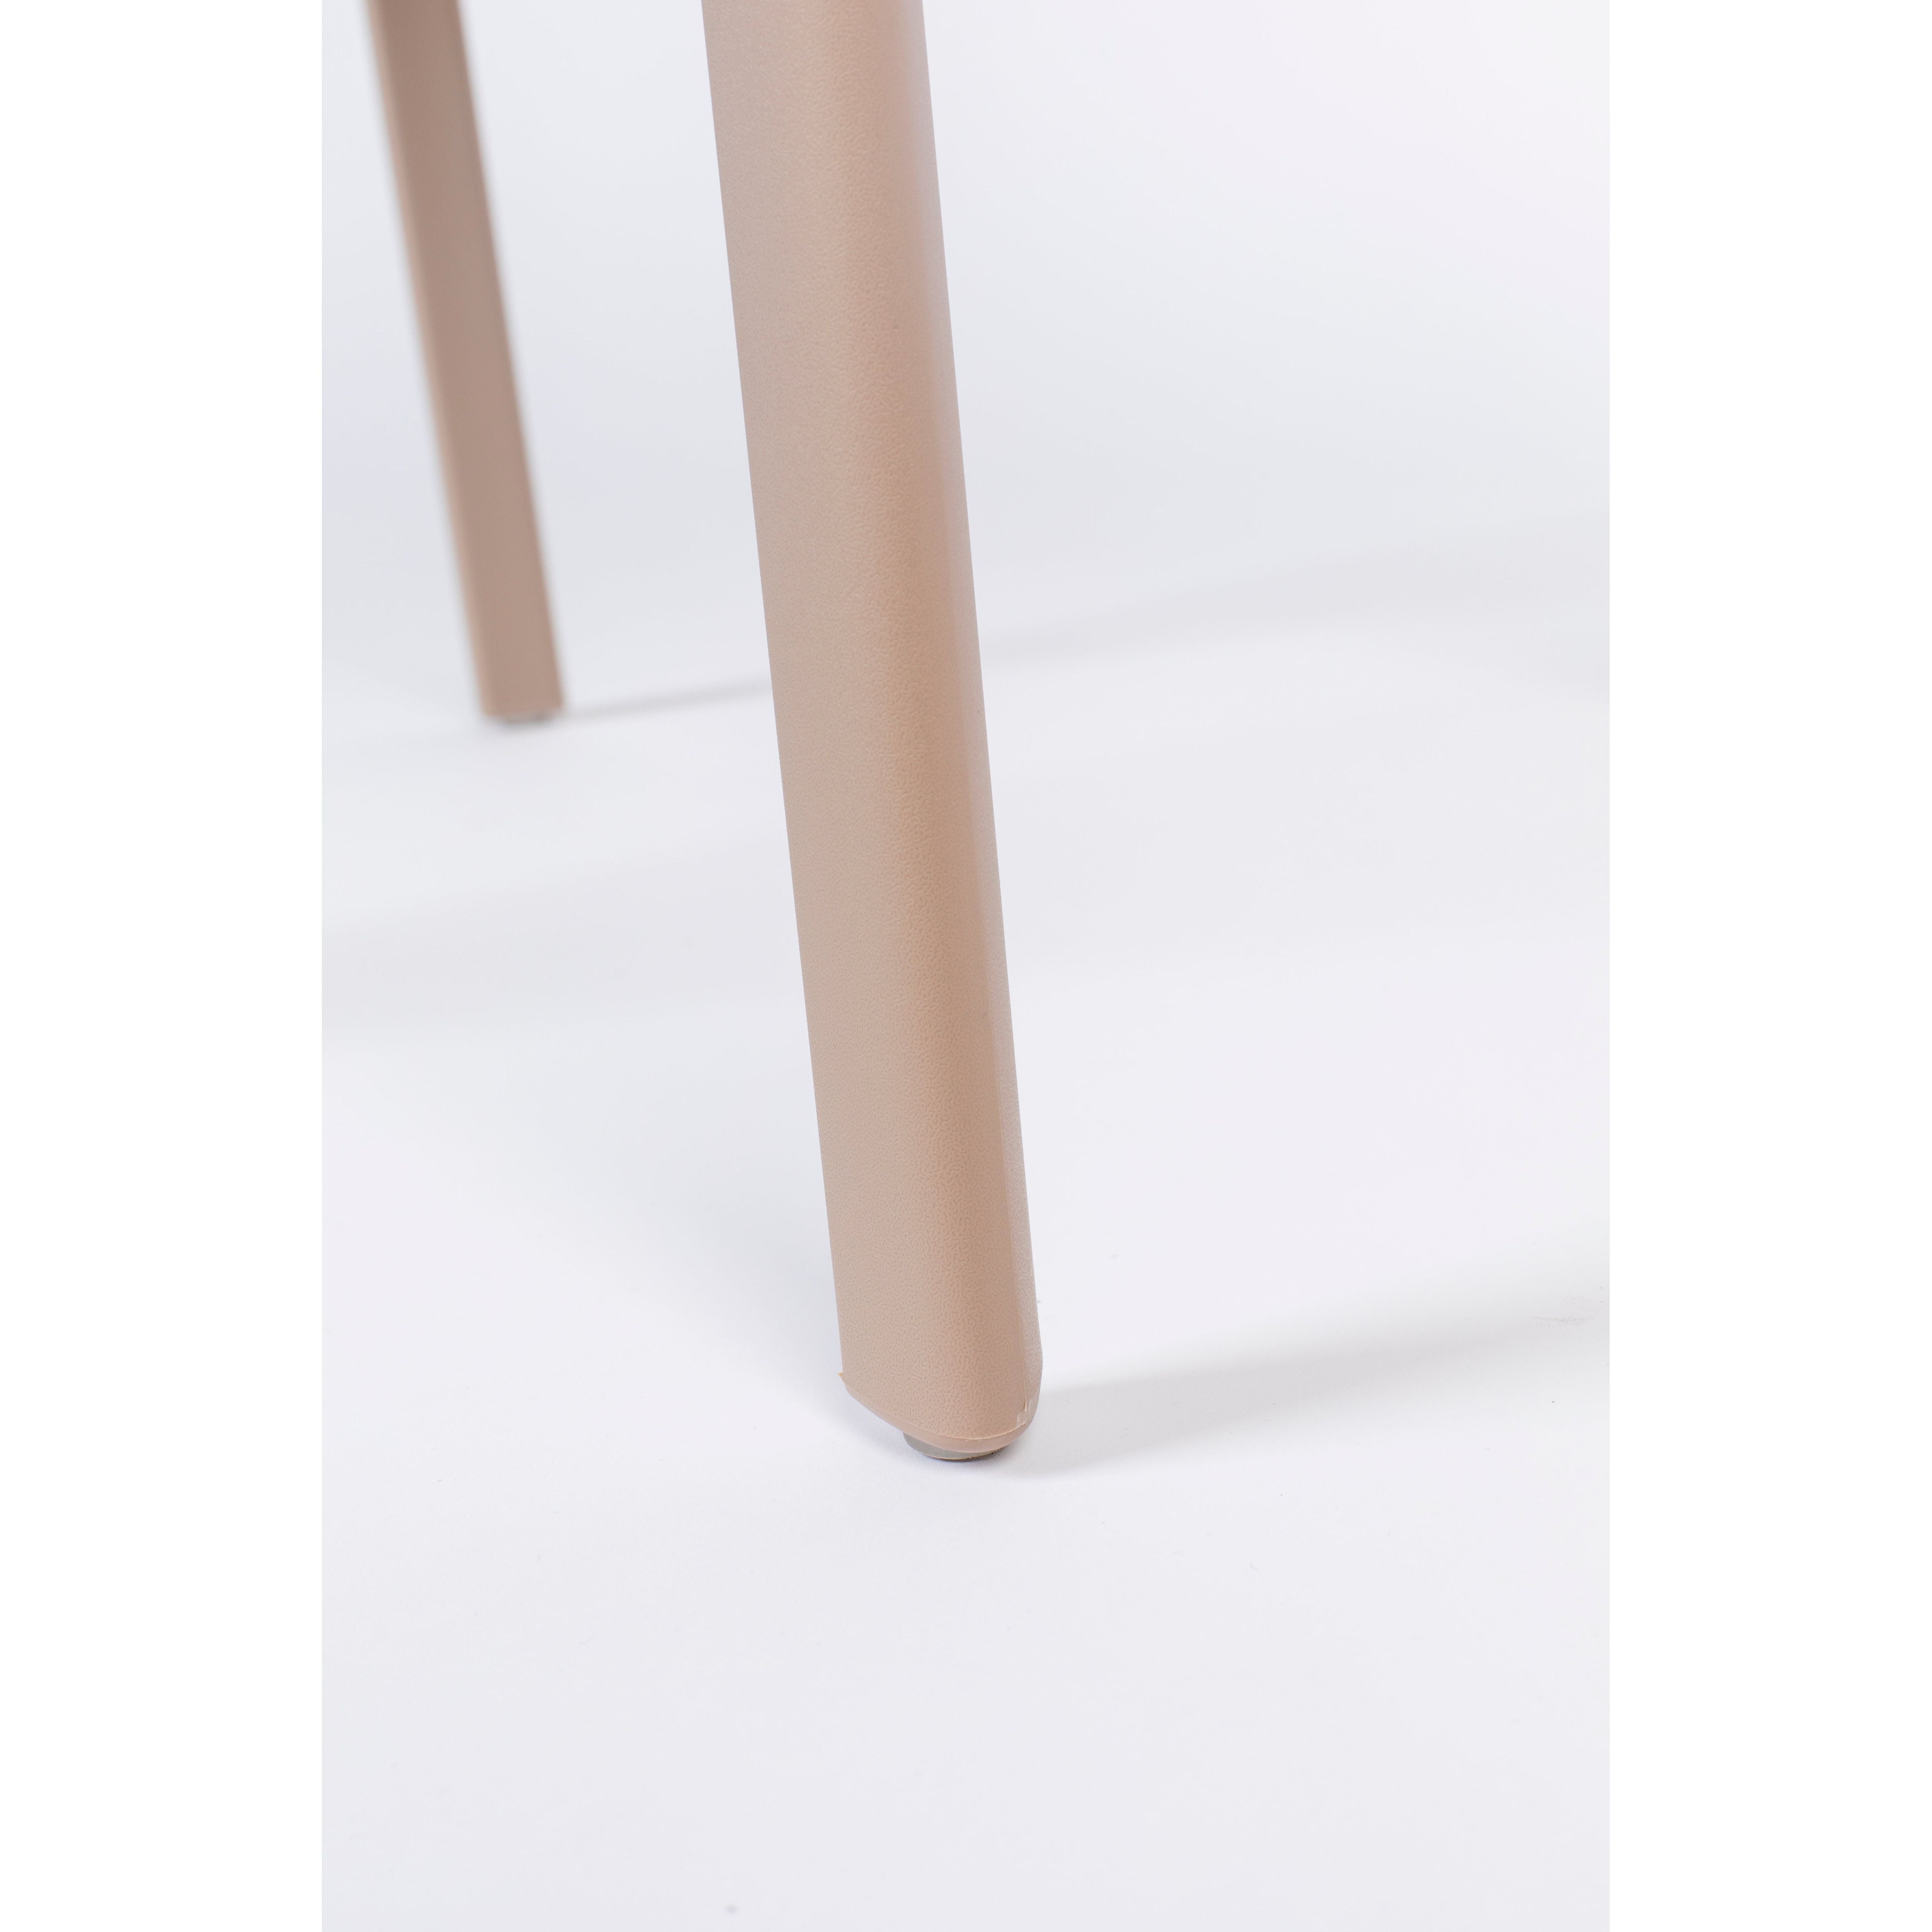 Chair clive light brown | 4 pieces